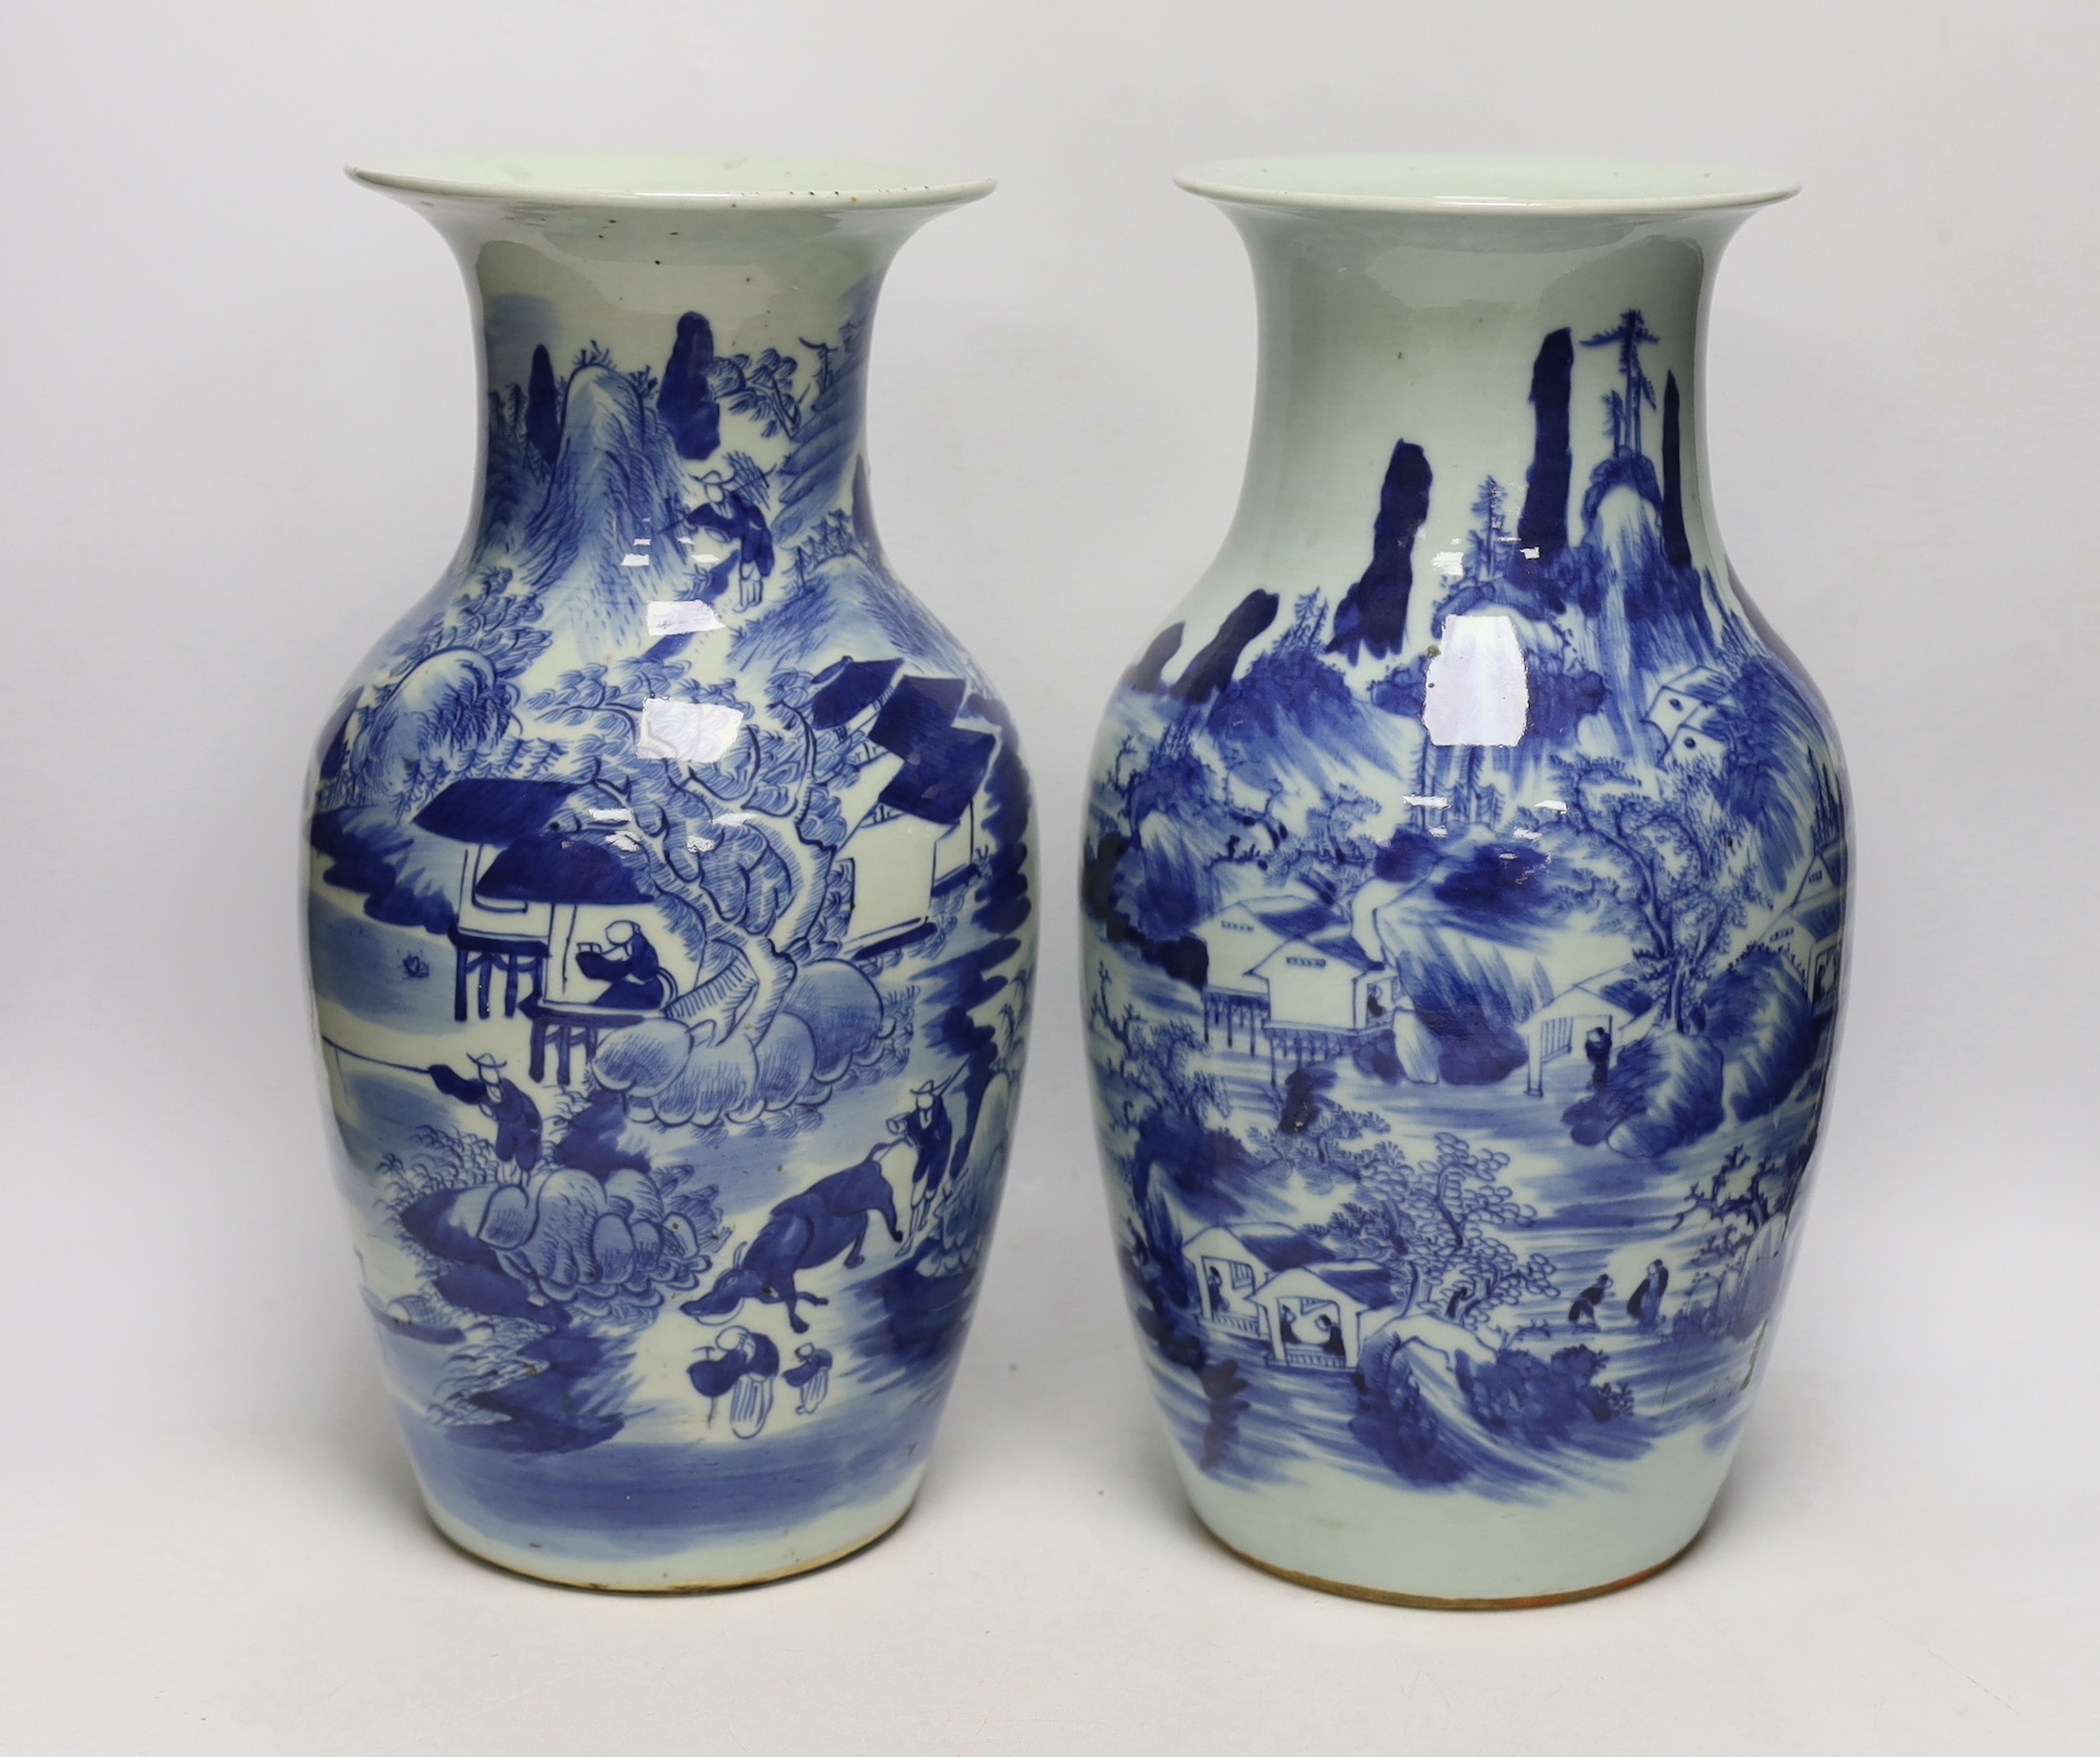 Two 19th century Chinese blue and white vases, 34cm high